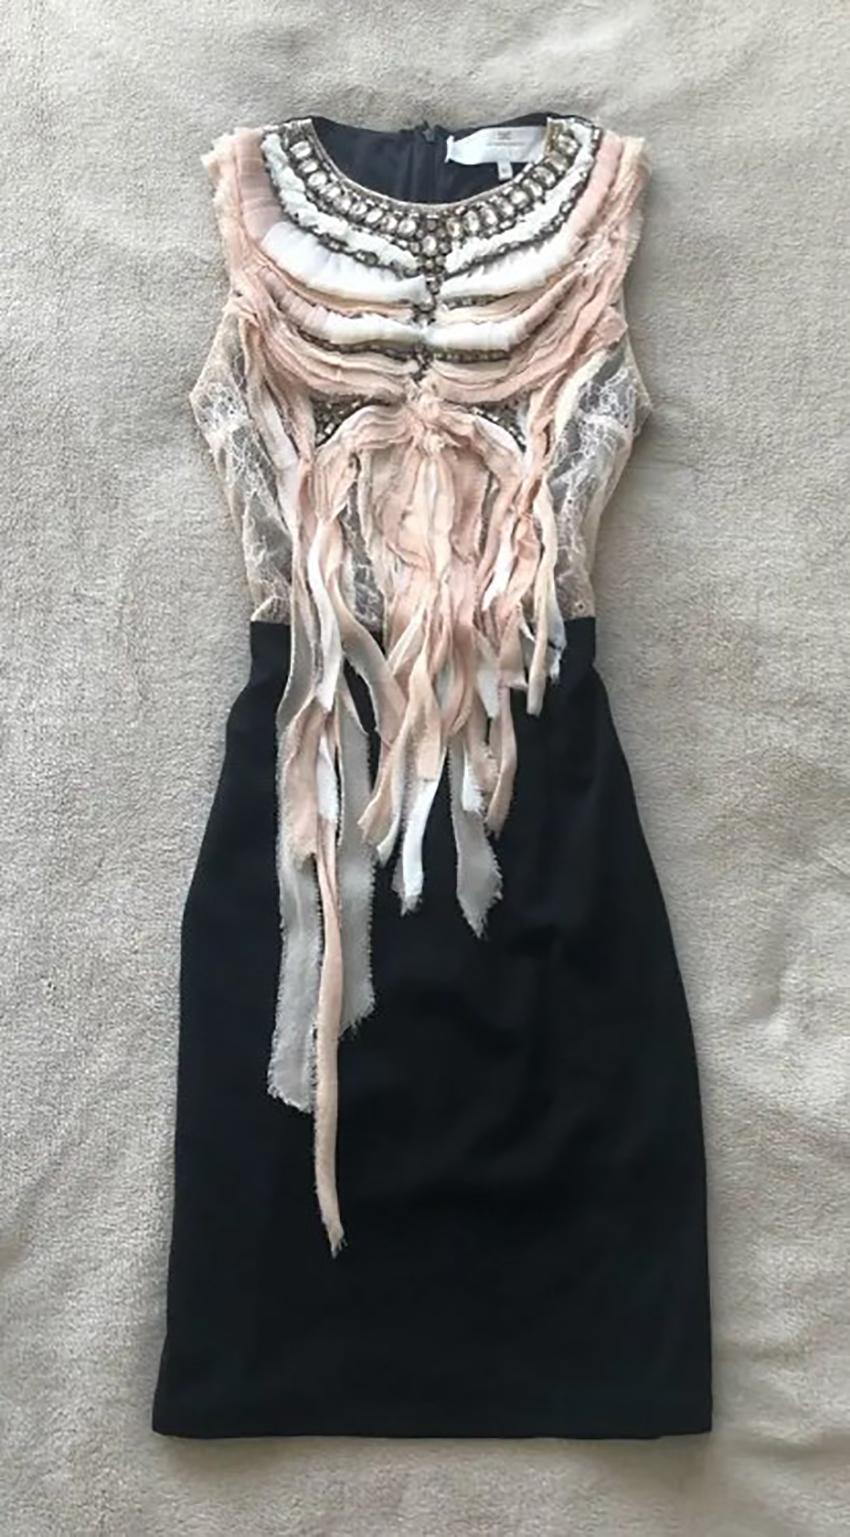 
ELISABETTA FRANCHI

Black and pink Elisabetta Franchi dress embellished with stones. 
Looks very impressive
Round neckline
Sleeveless
Mini

Content: 57% viscose, 35% polyamide, 8% elastane

Size IT 42 - US 6

Pre-owned in excellent condition

 100%